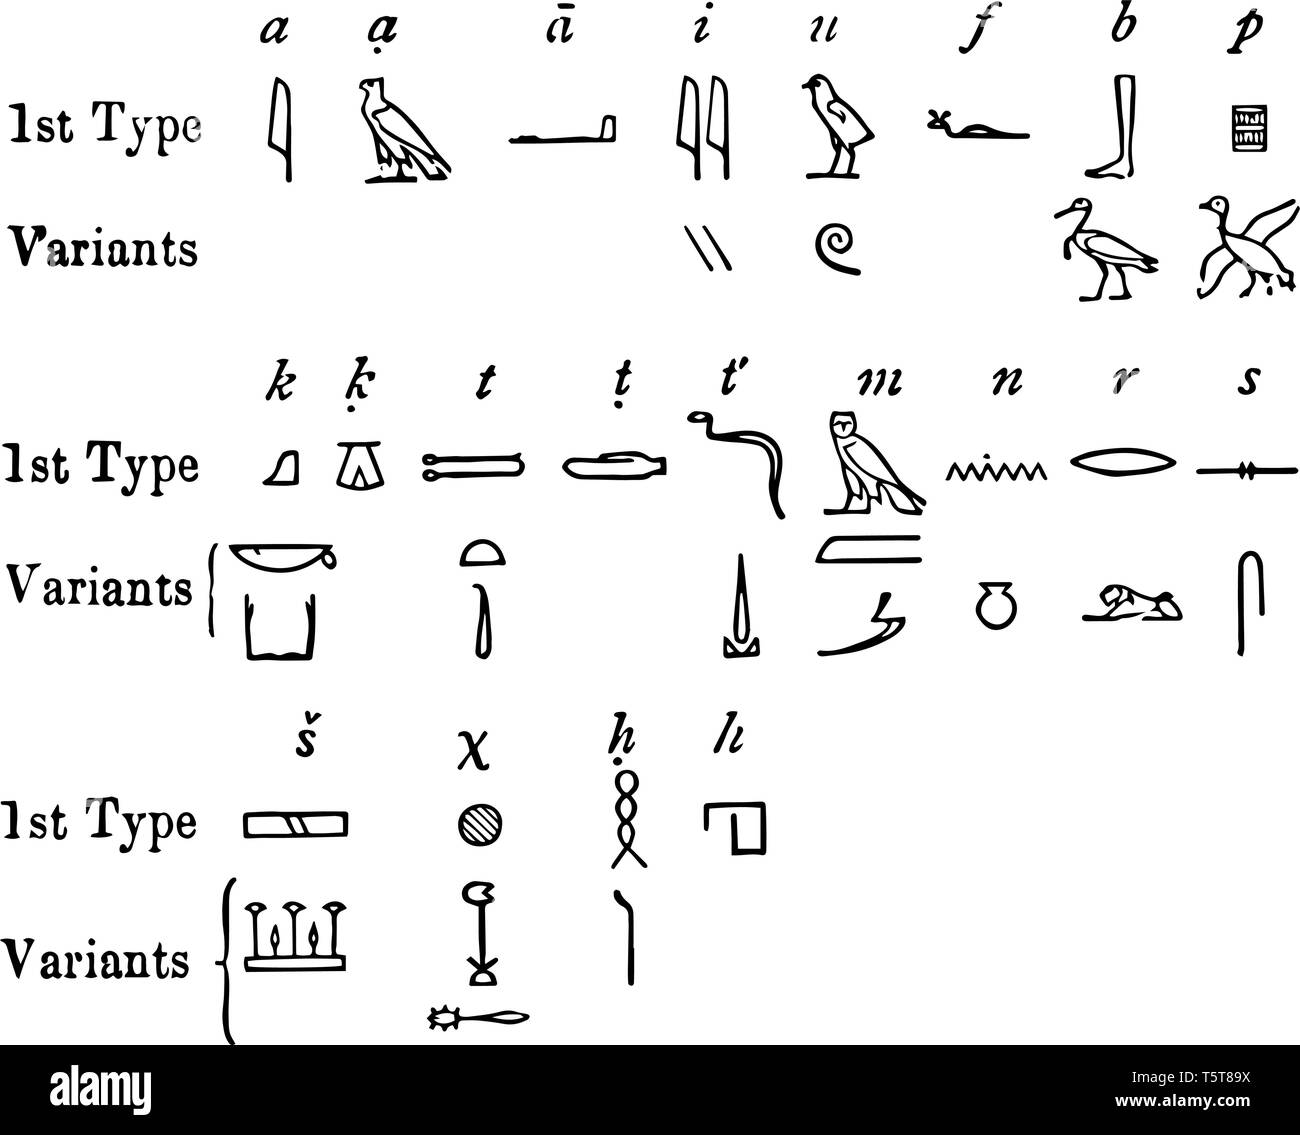 name three types of egyptian writing and describe their purposes/uses